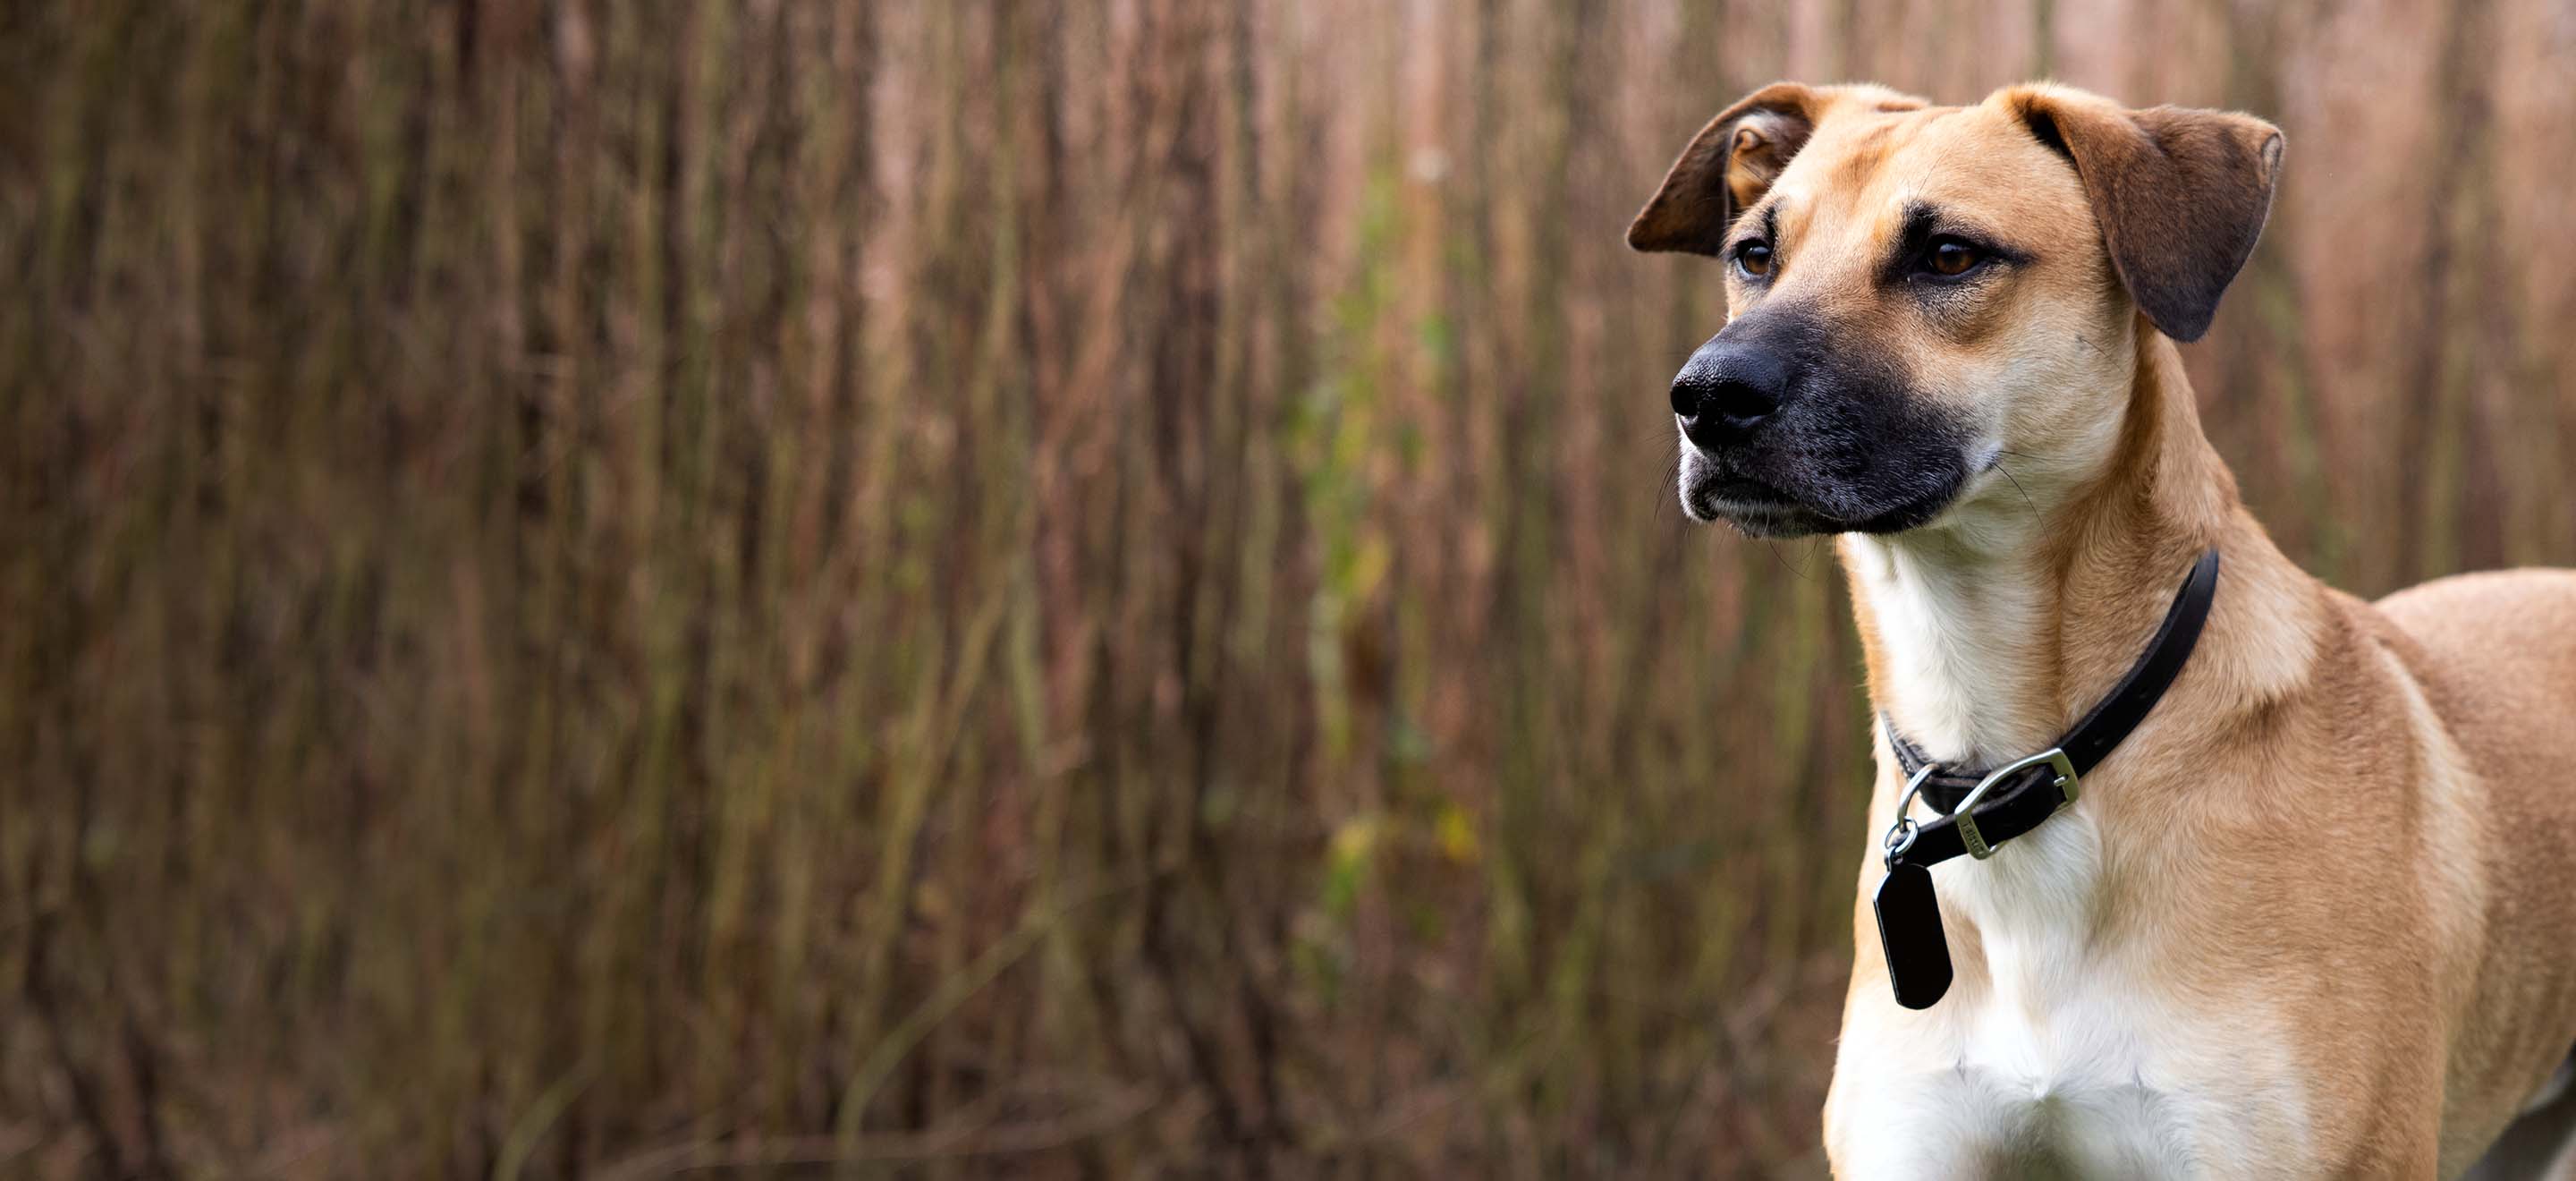 A Black Mouth Cur dog with a black leather collar standing amongst the reeds image